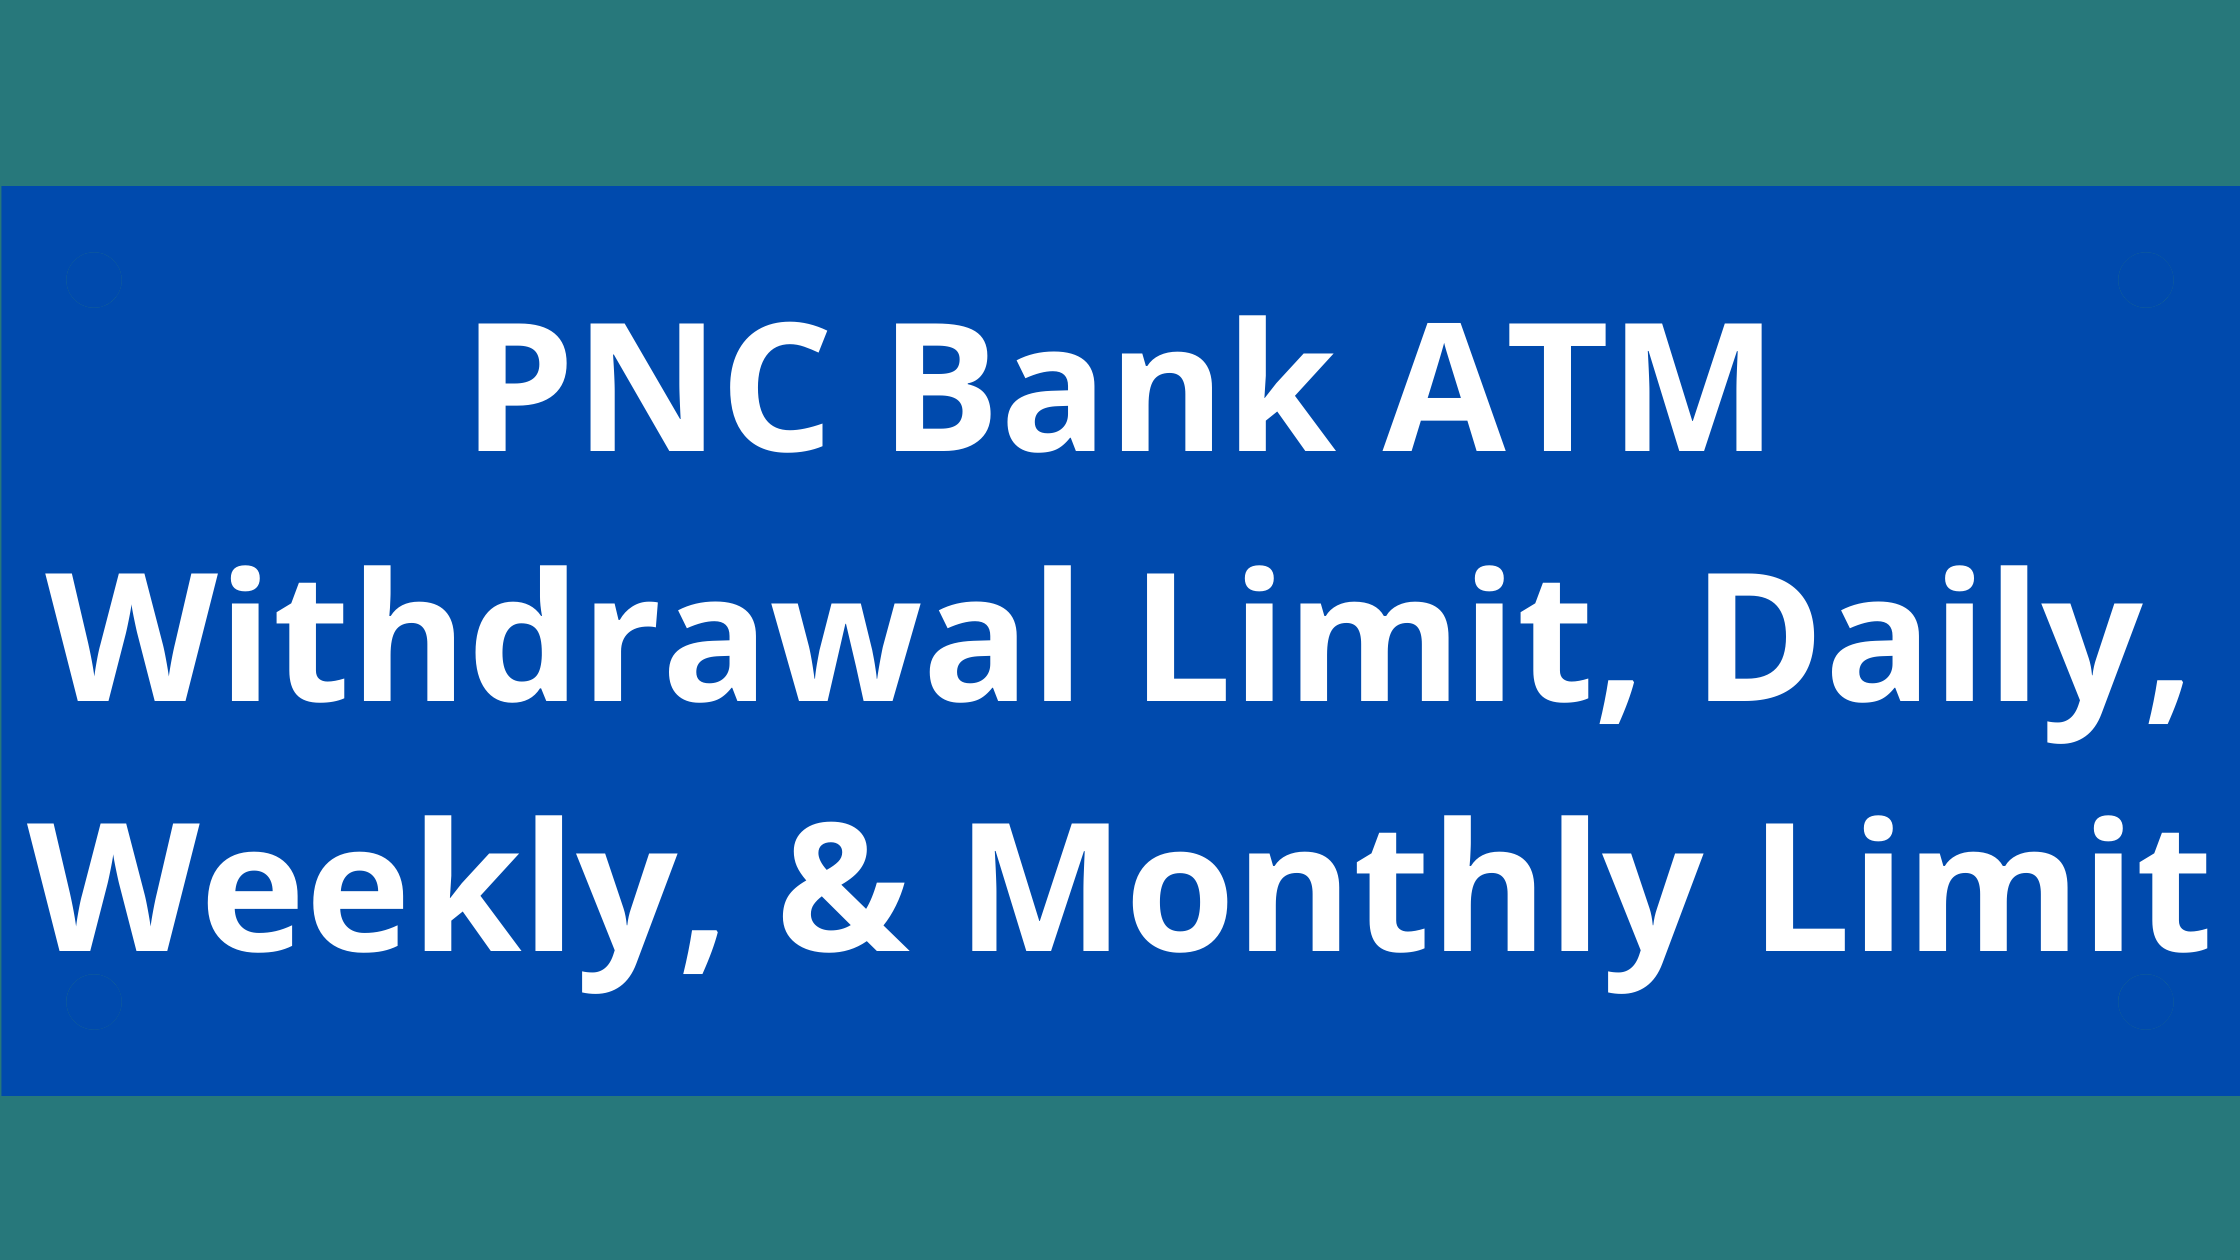 Pnc Business Atm Withdrawal Limit